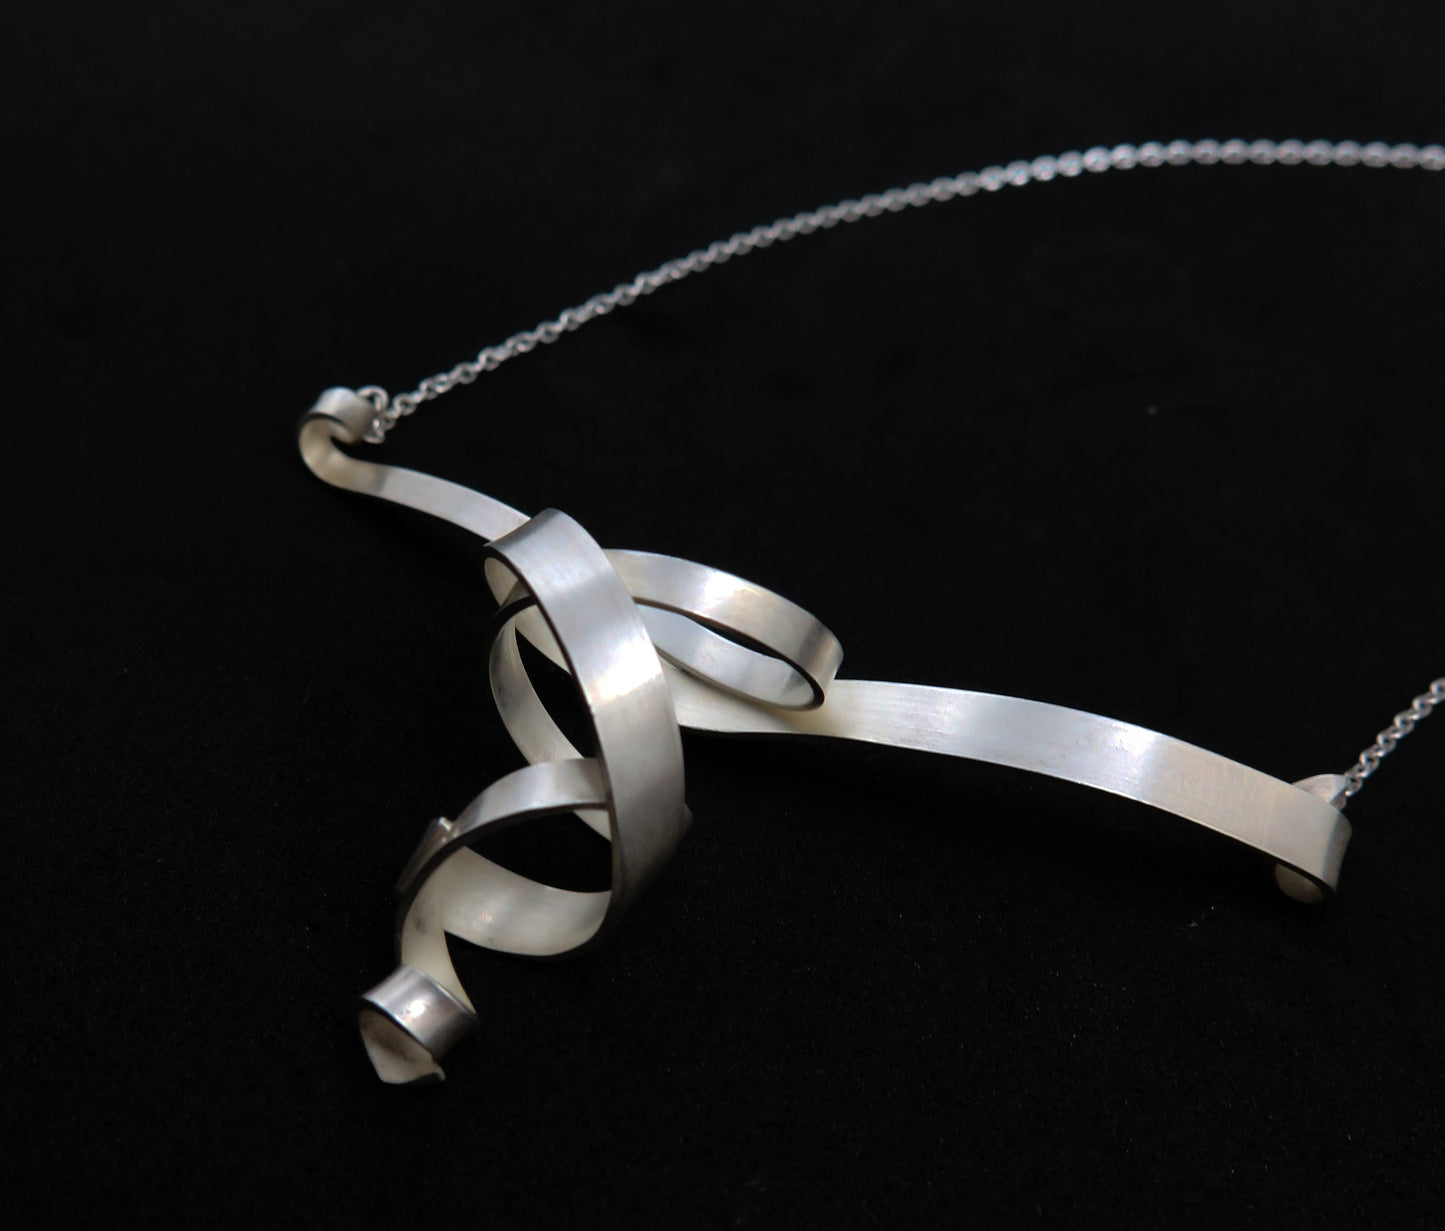 A double helix spiral necklace in sterling silver with a matte finish on a silver chain.